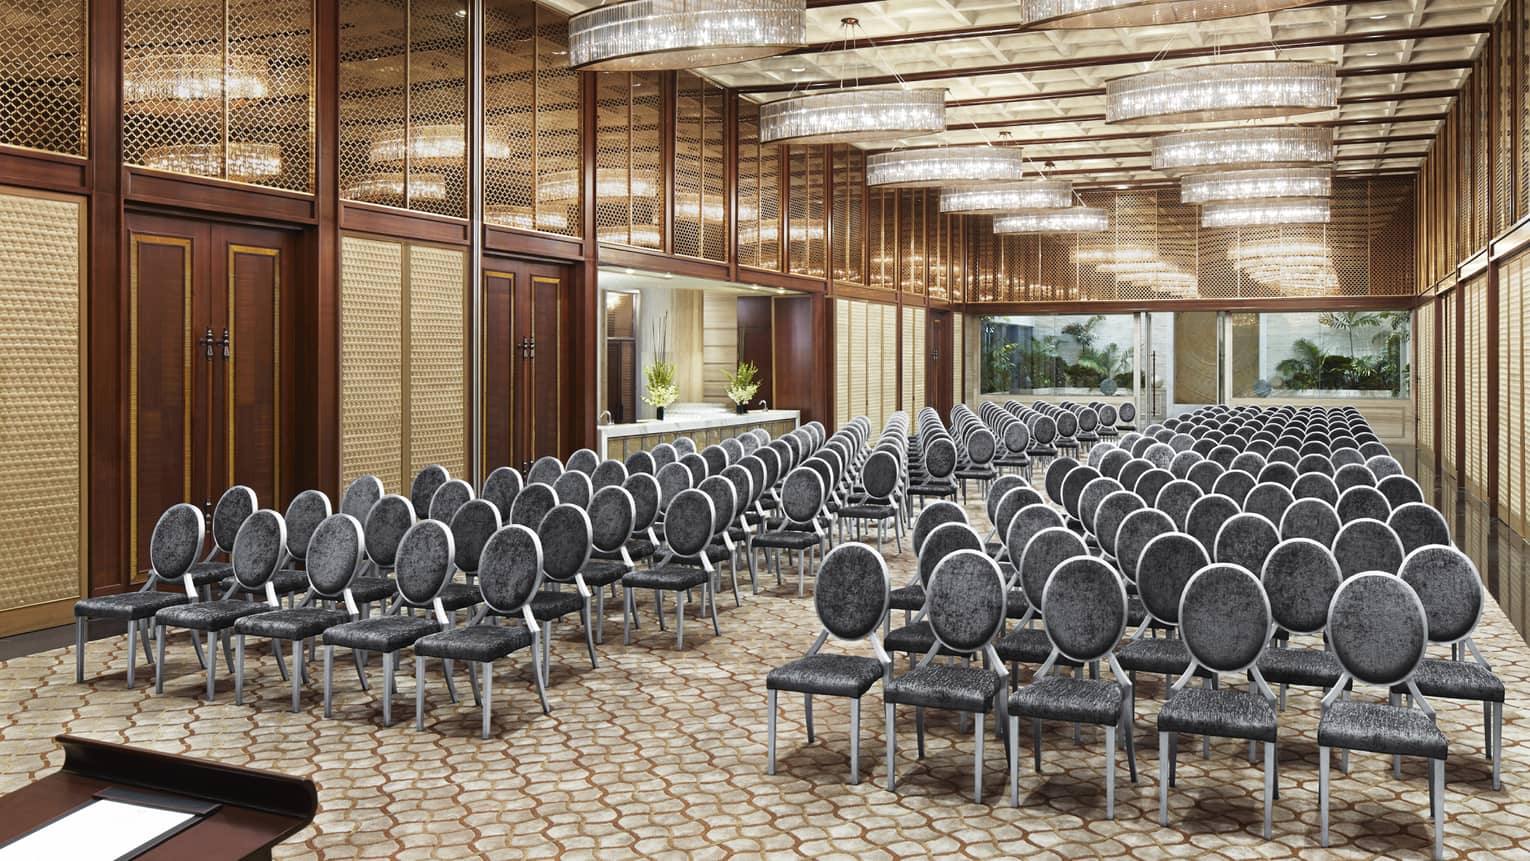 Rows of meeting chairs facing podium in long Gallery ballroom